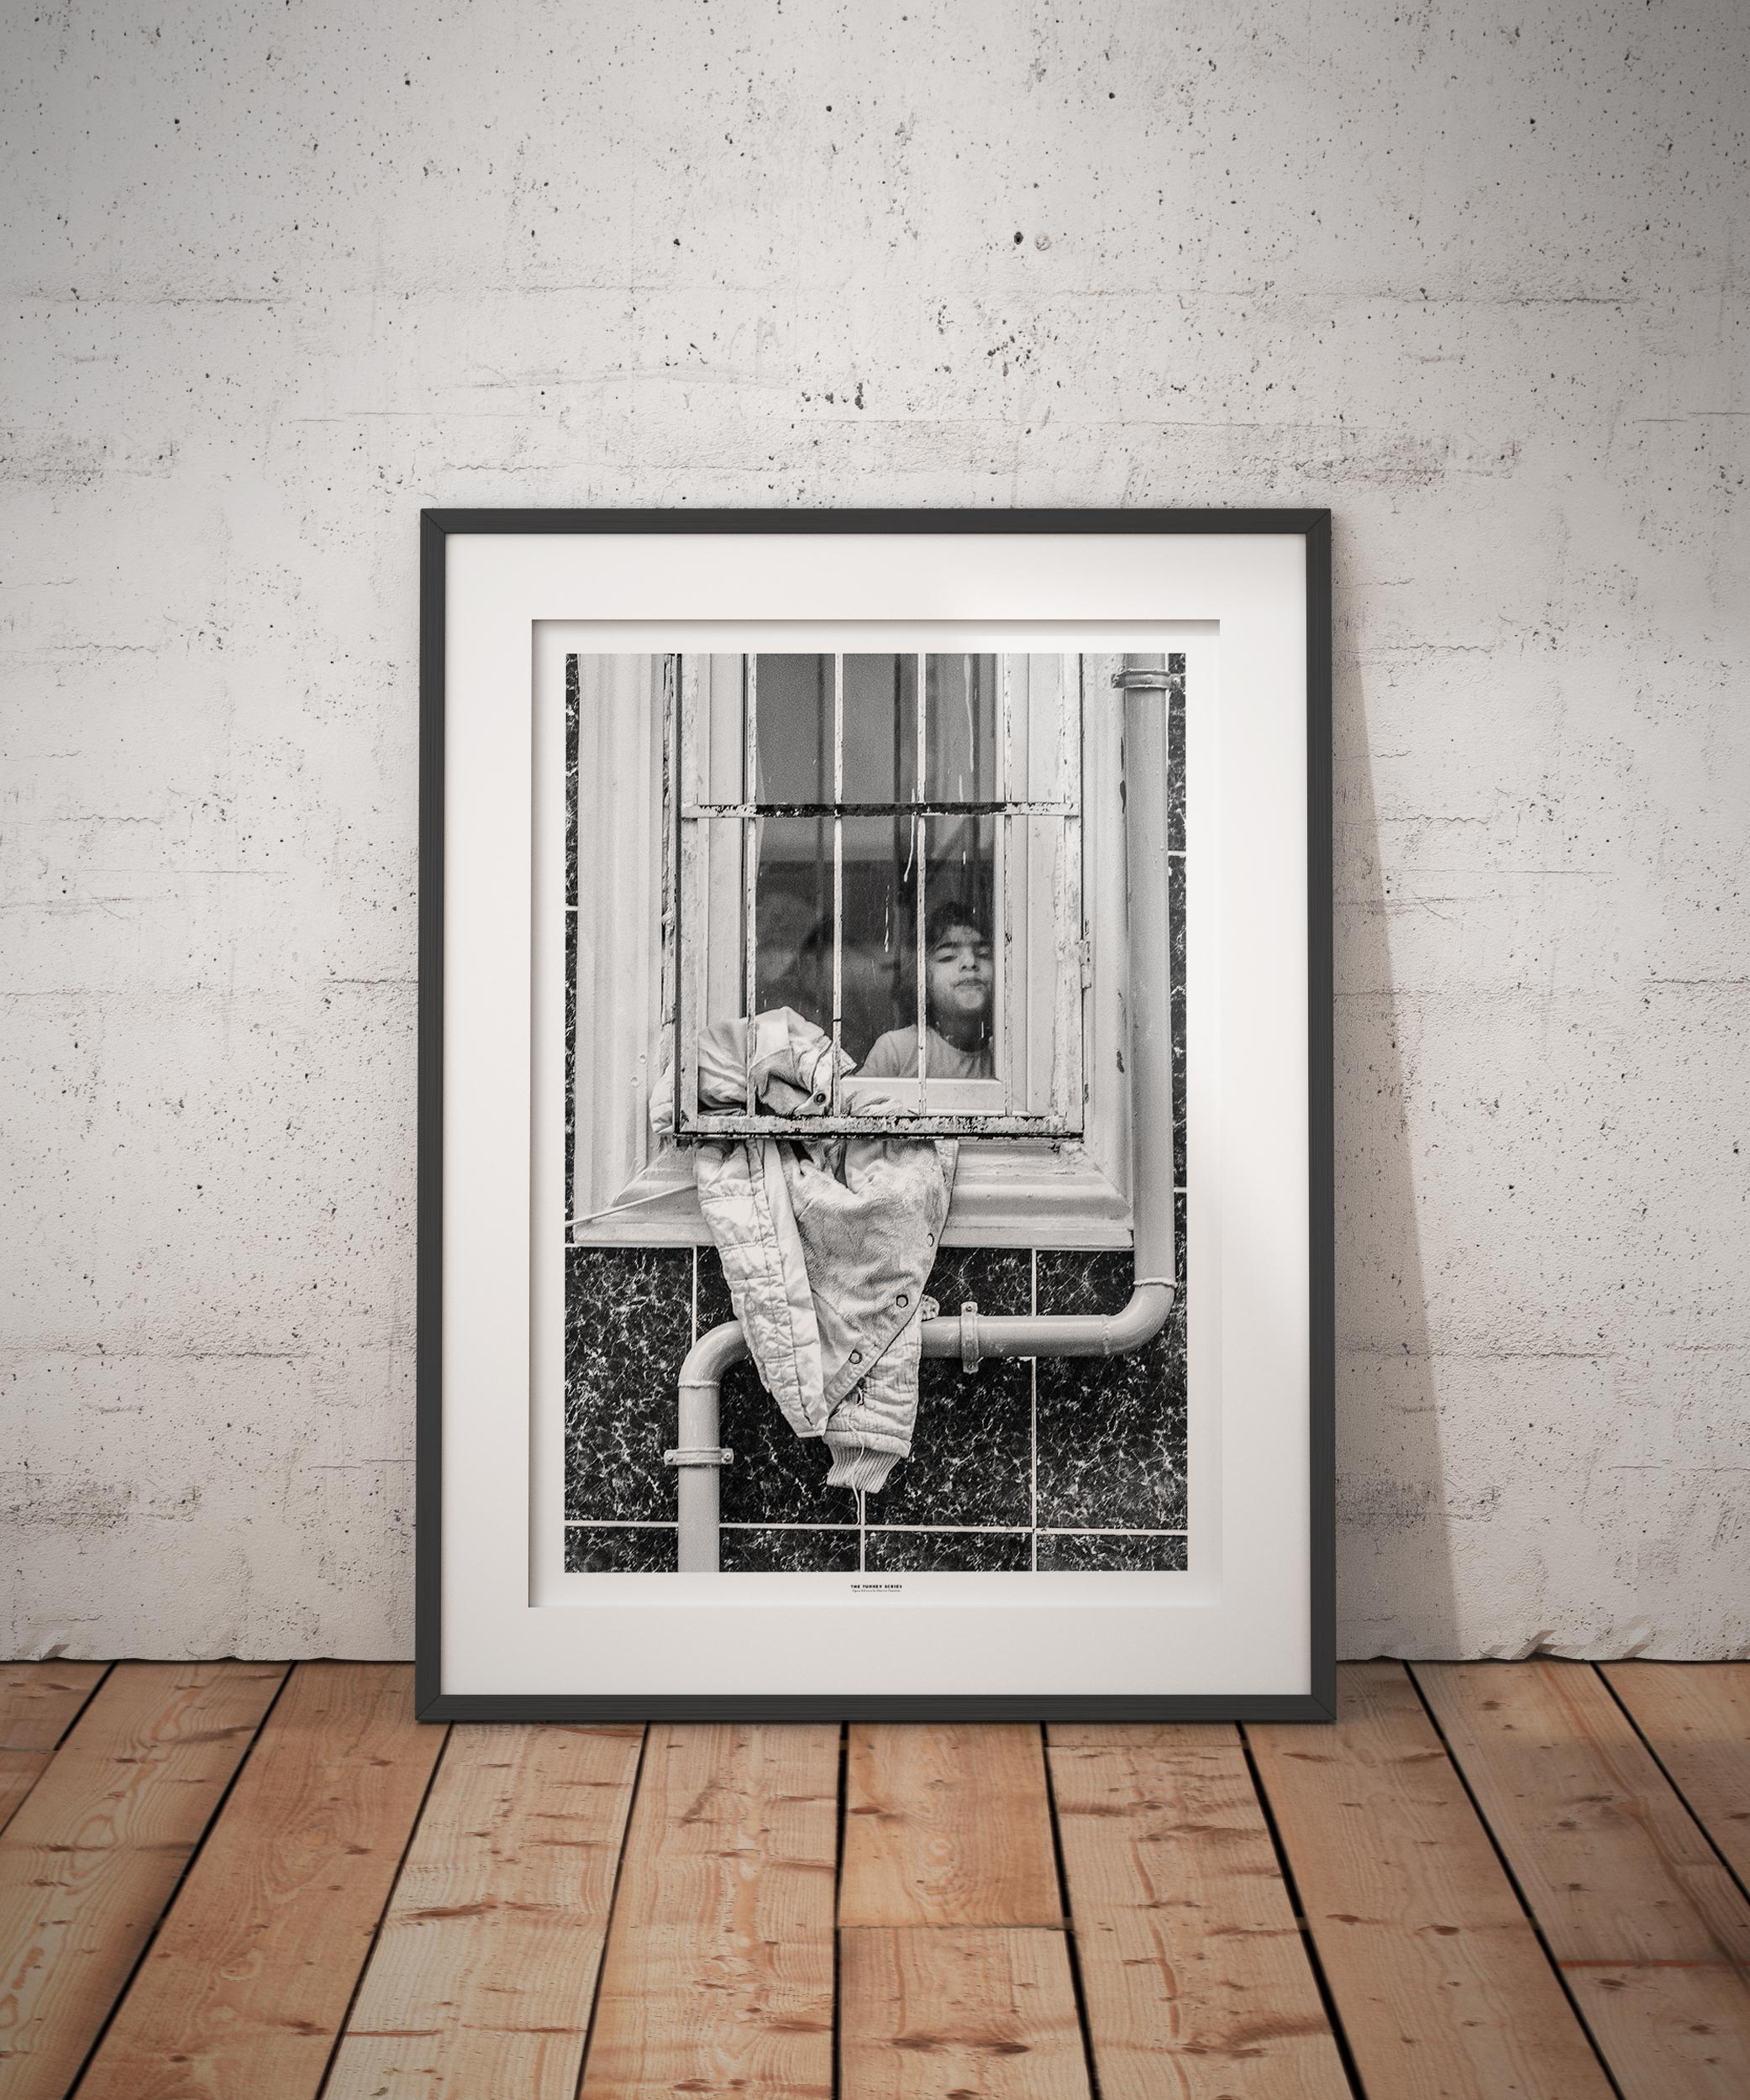 The Turkey Series - A Syrian girl in a window in Al Fatih, Istanbul. Photo by photographer Martin Thaulow. Open Edition (seen in a frame in an environment. The frame is not part of sale). Buy high quality print.